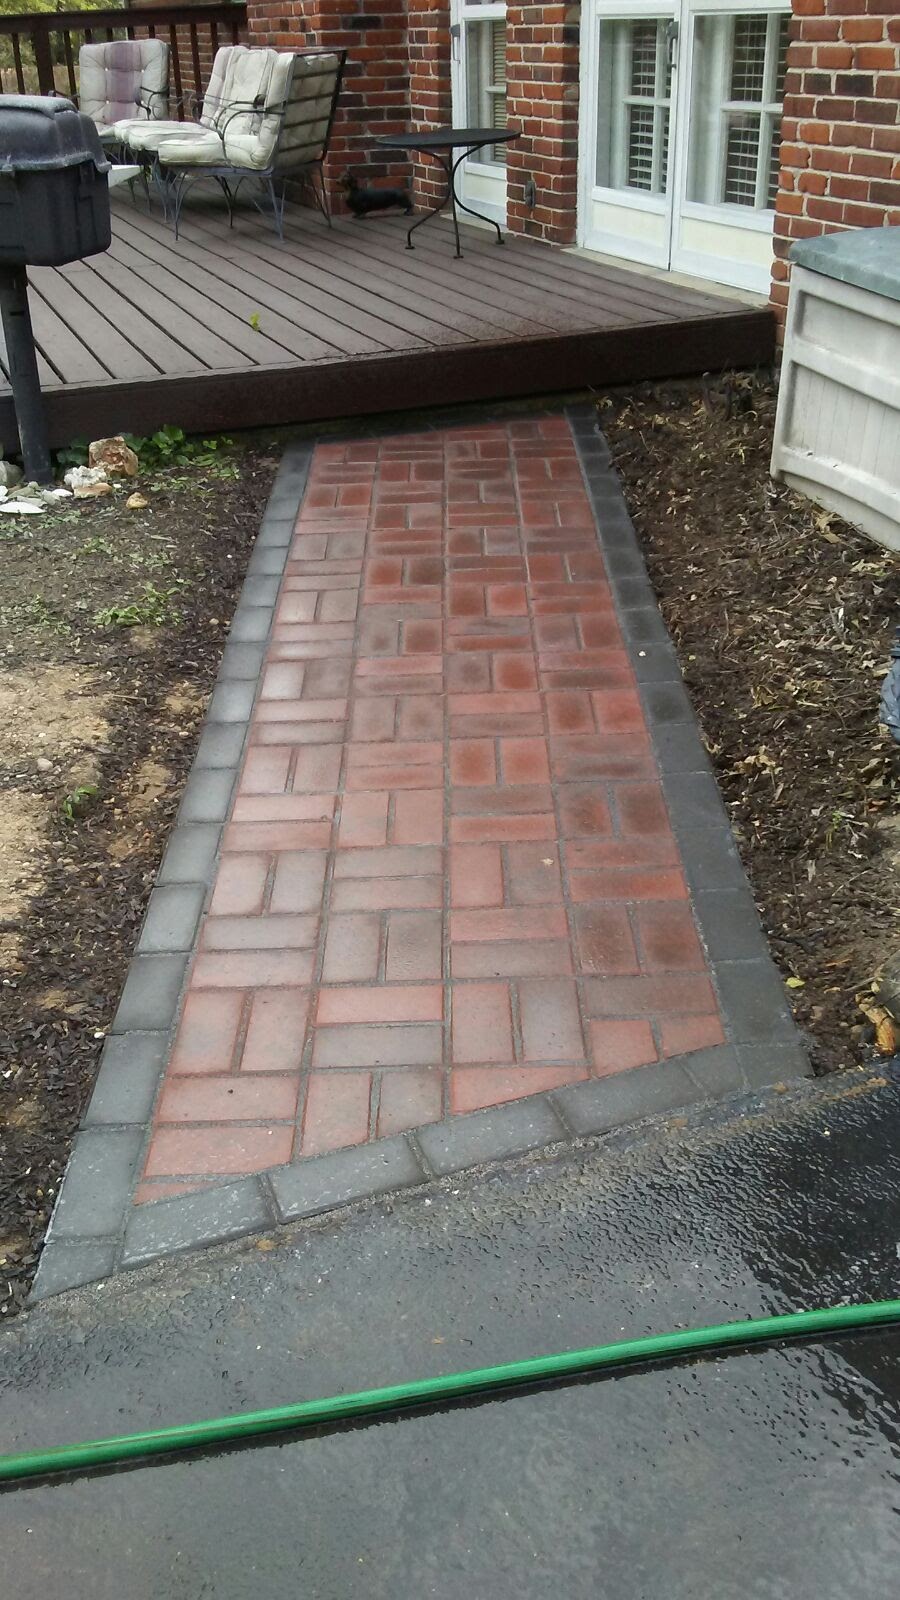 Paver Patio Design Installation - Lawn Care and Lanscaping ...